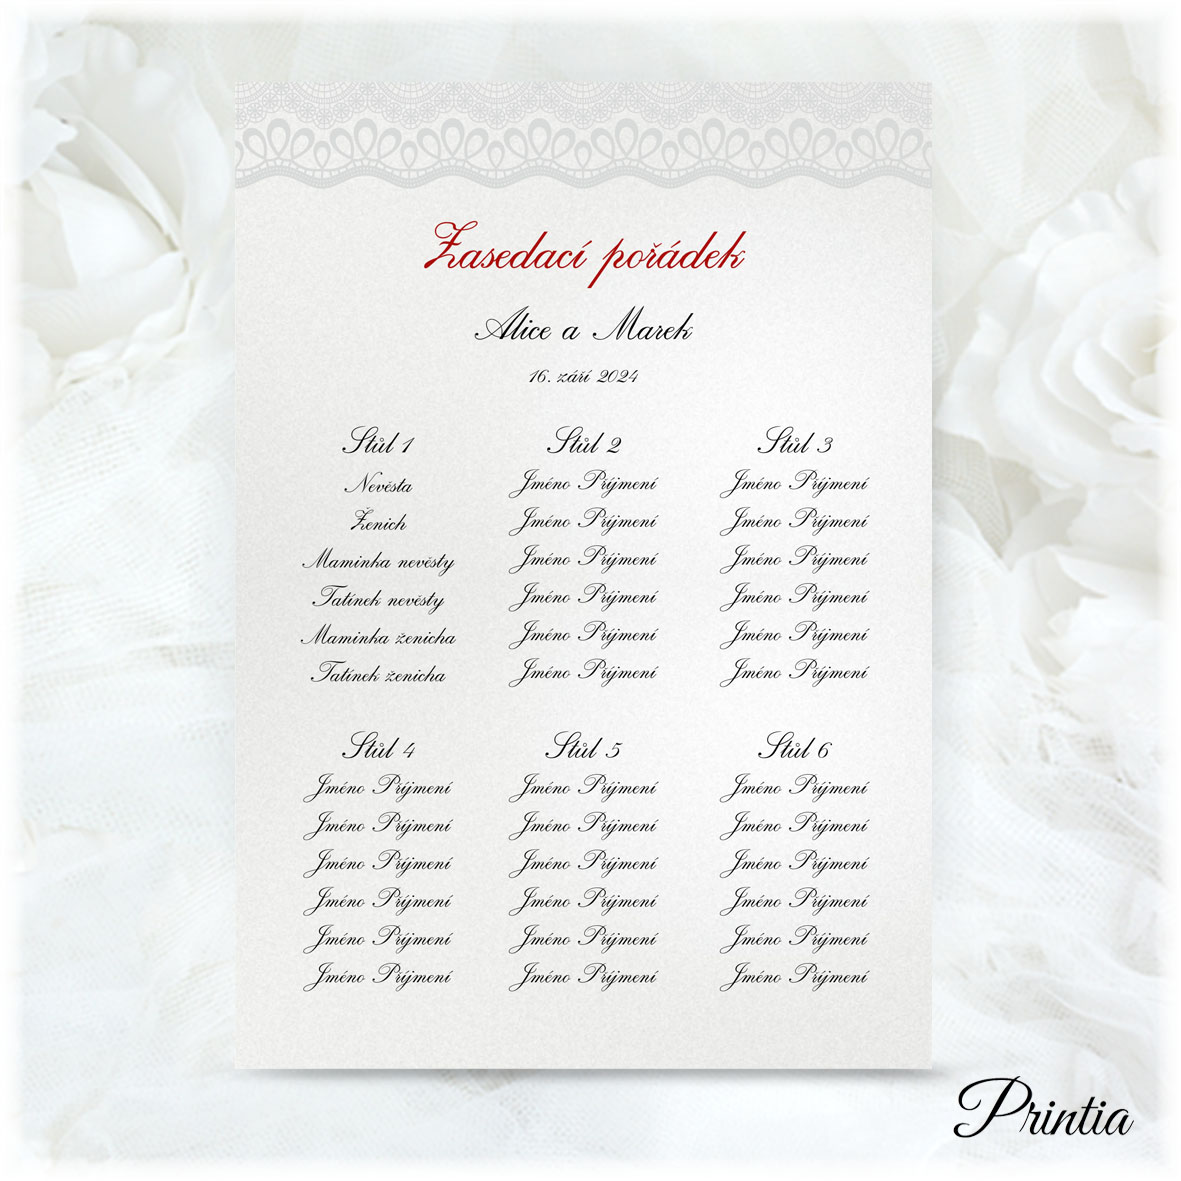 Wedding seating plan with a lace motif